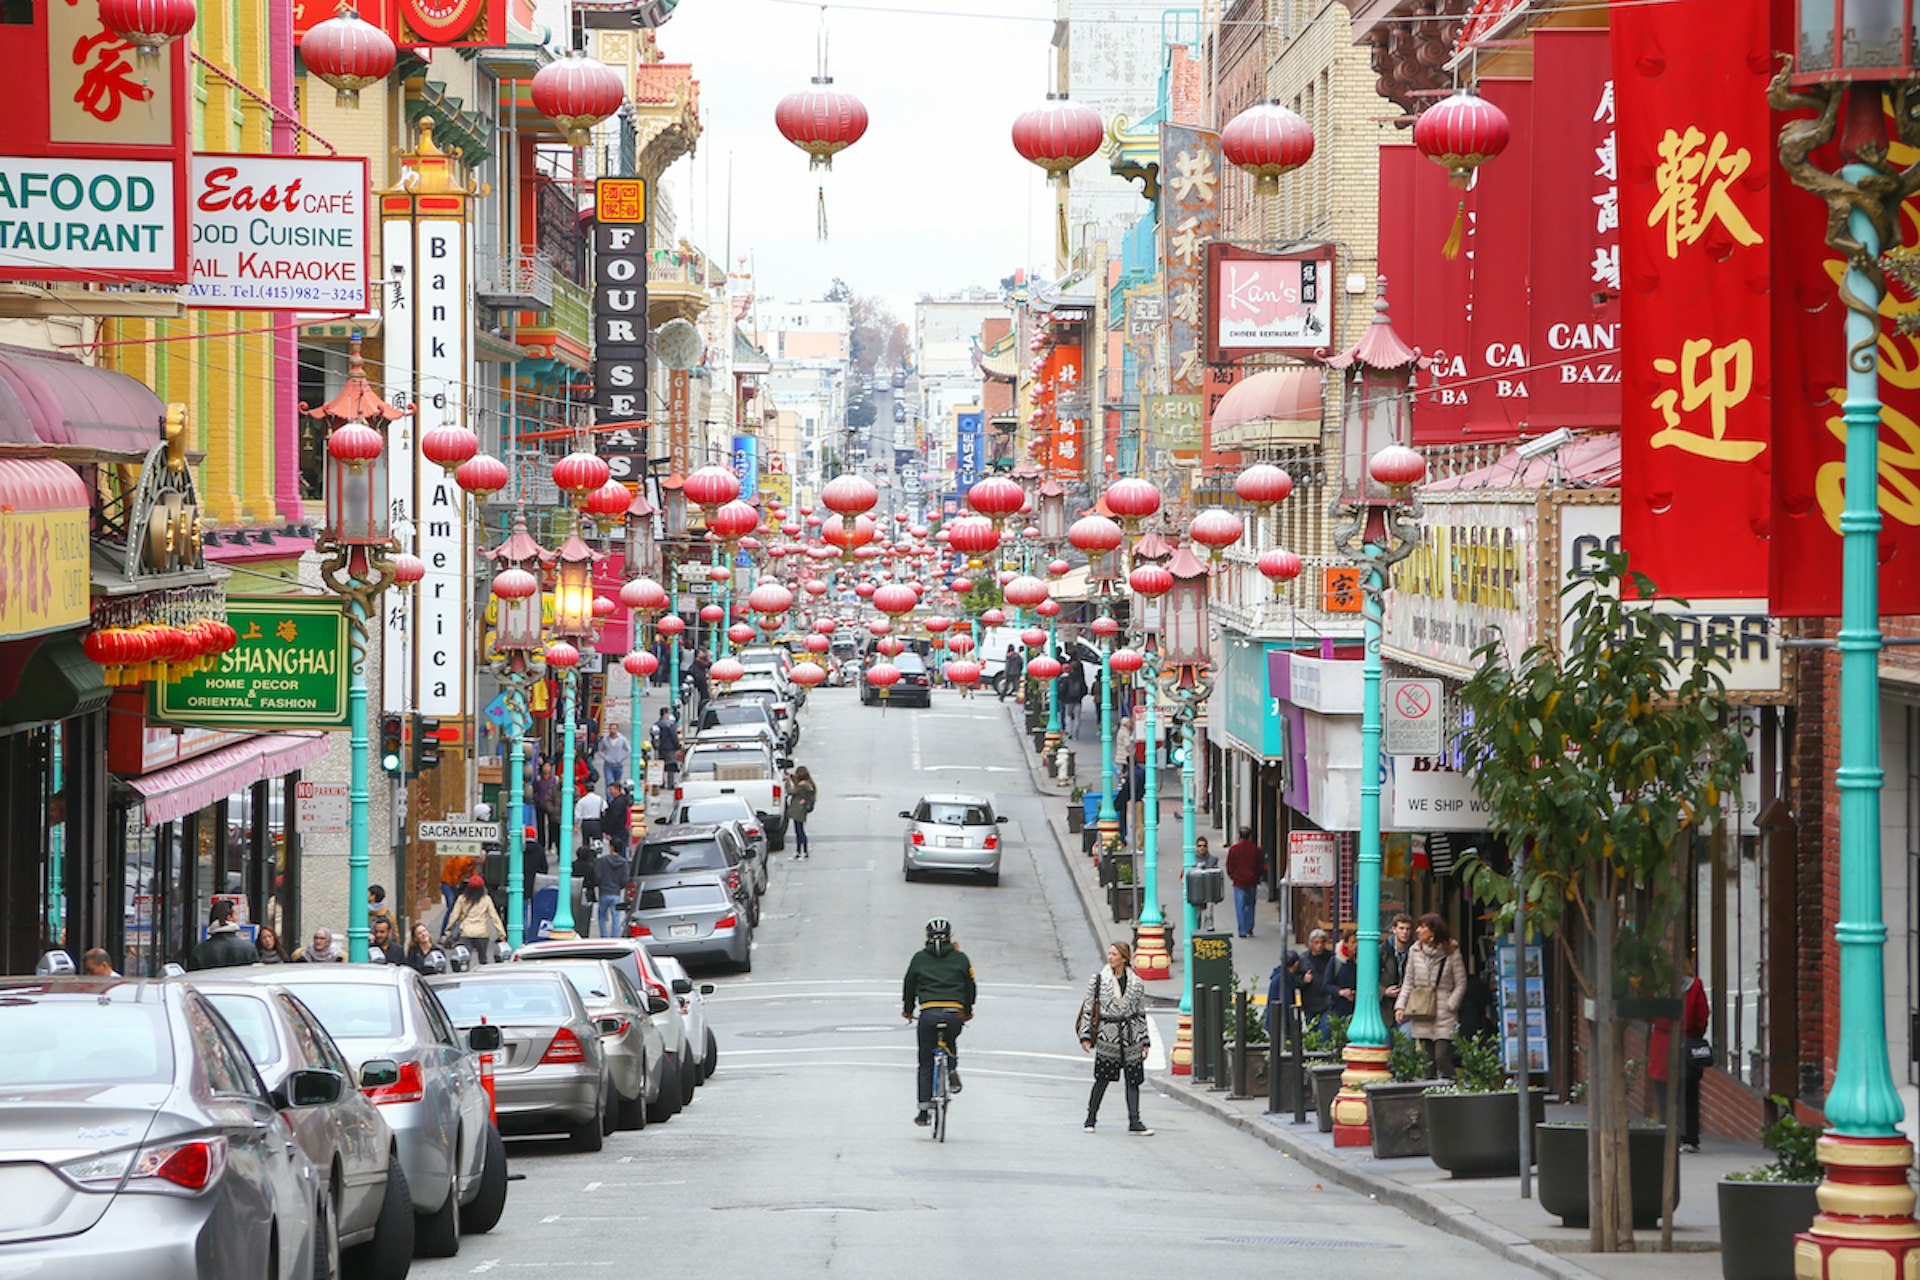 A man bicycles down Grant Ave in Chinatown, San Francisco, California, USA